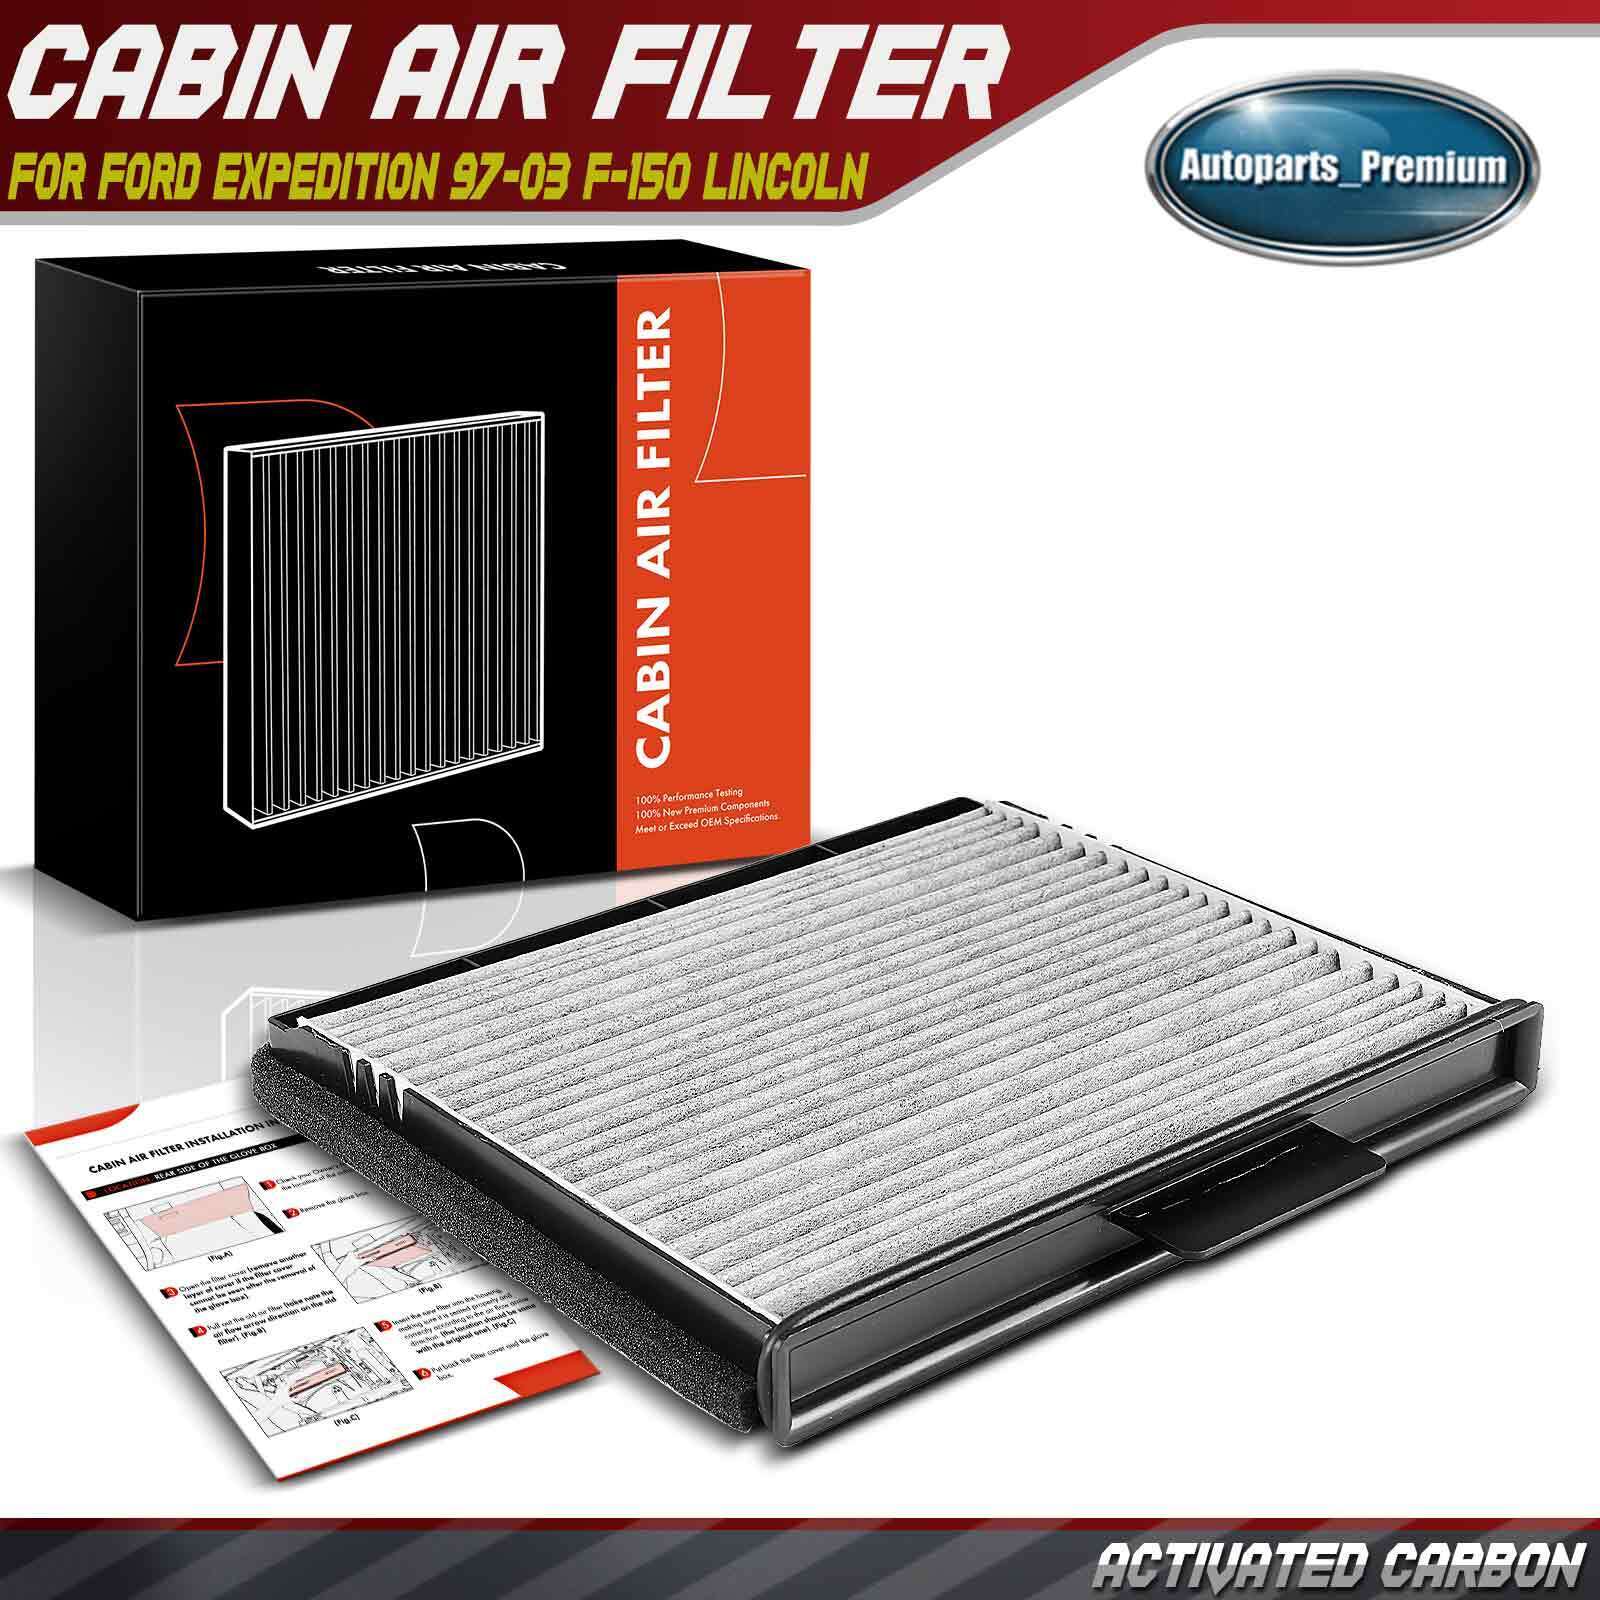 Activated Carbon Cabin Air Filter for Ford Expedition 97-03 Lincoln Navigator